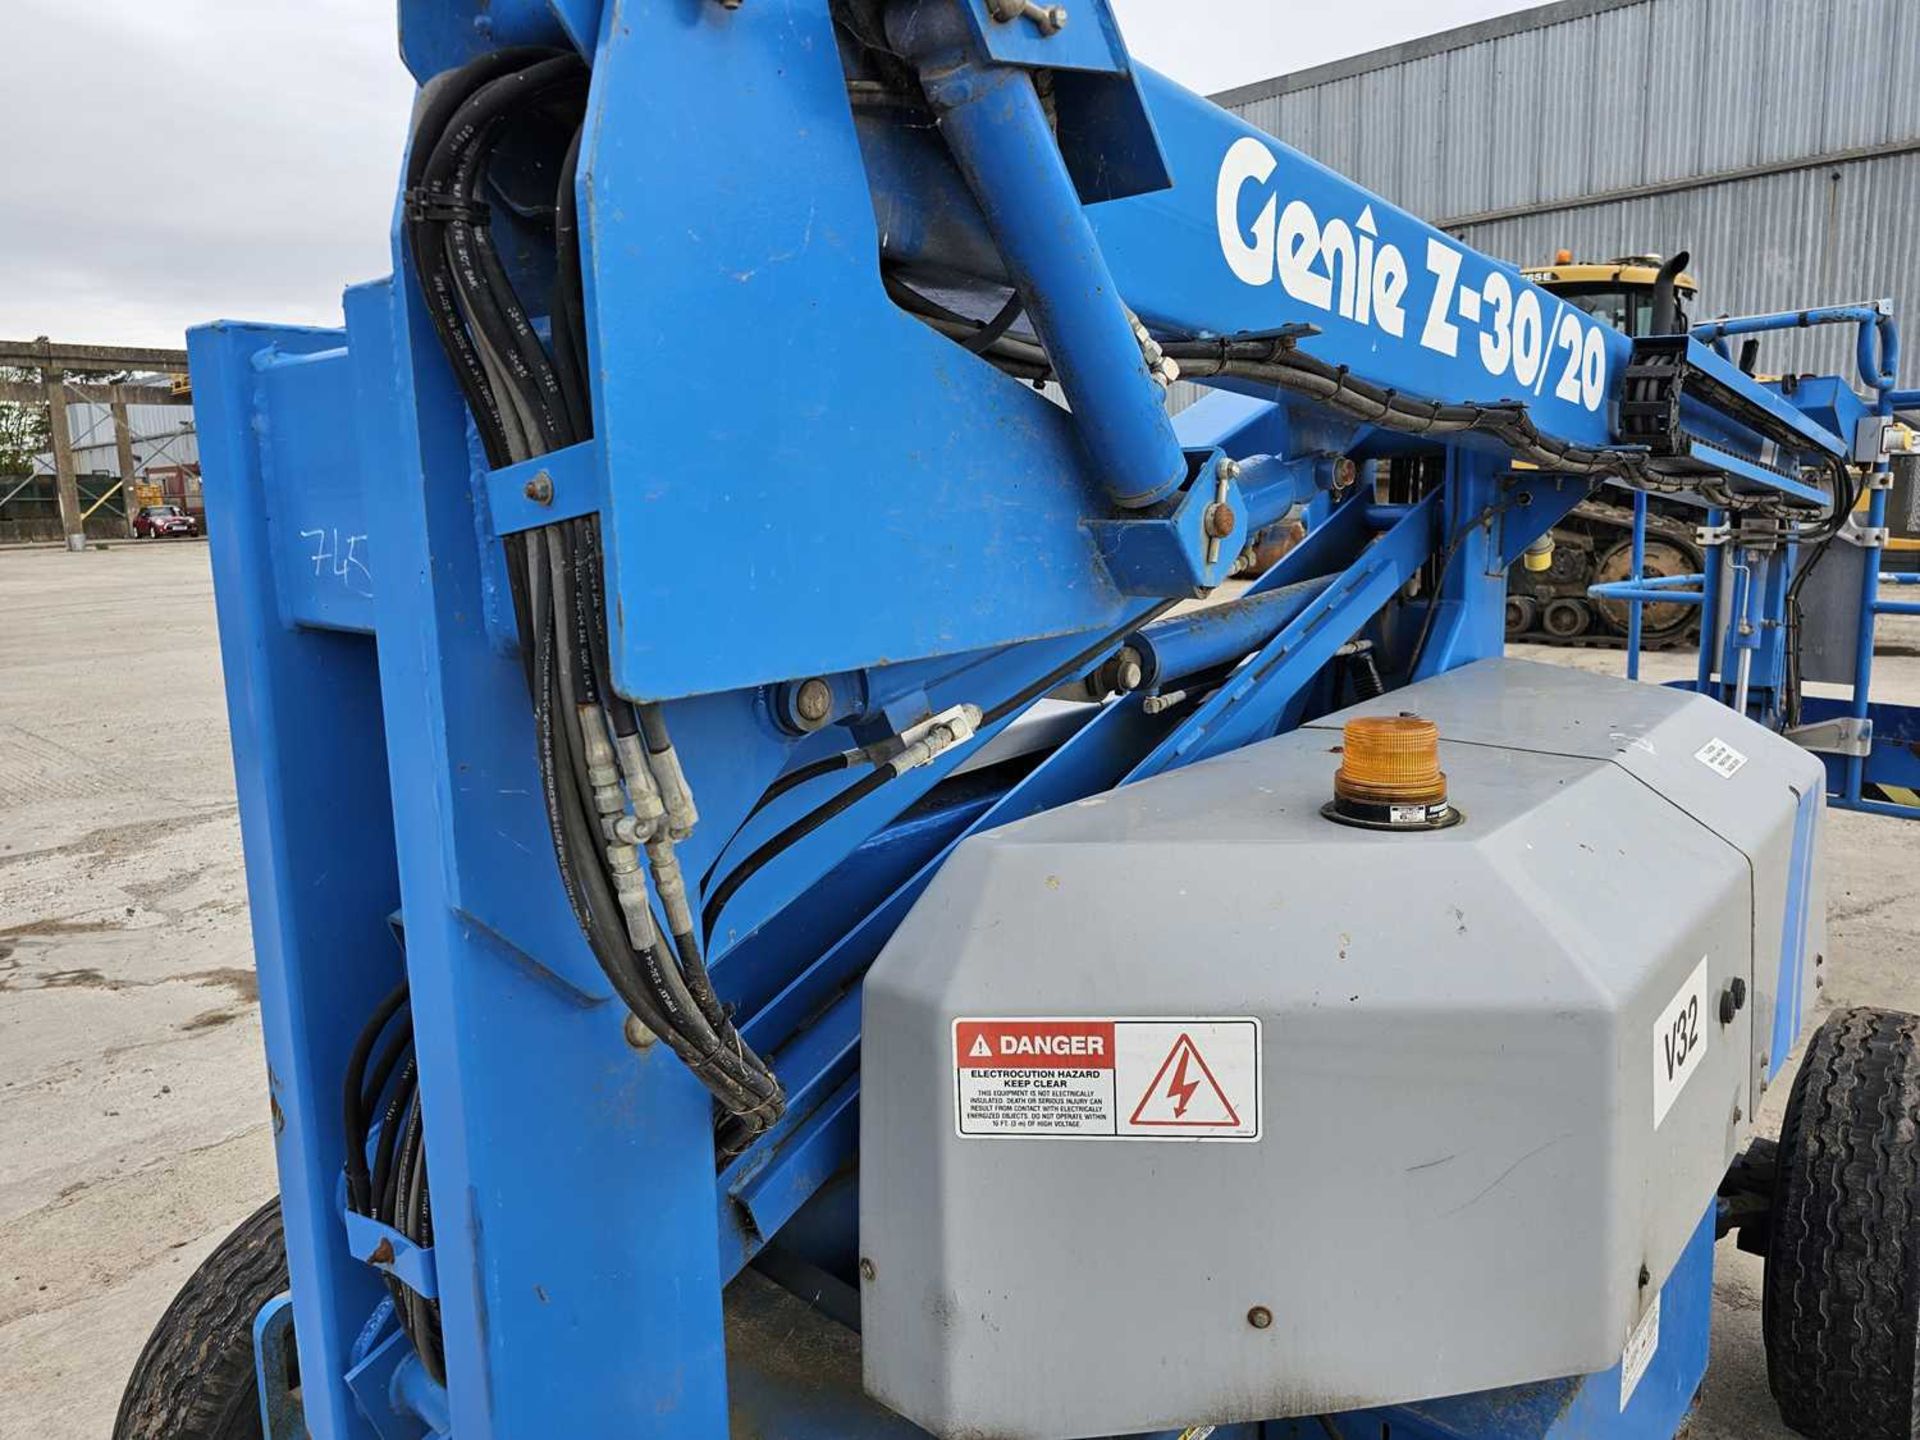 Genie Z30/20HD Wheeled Articulated Electric Scissor Lift Access Platform - Image 14 of 17